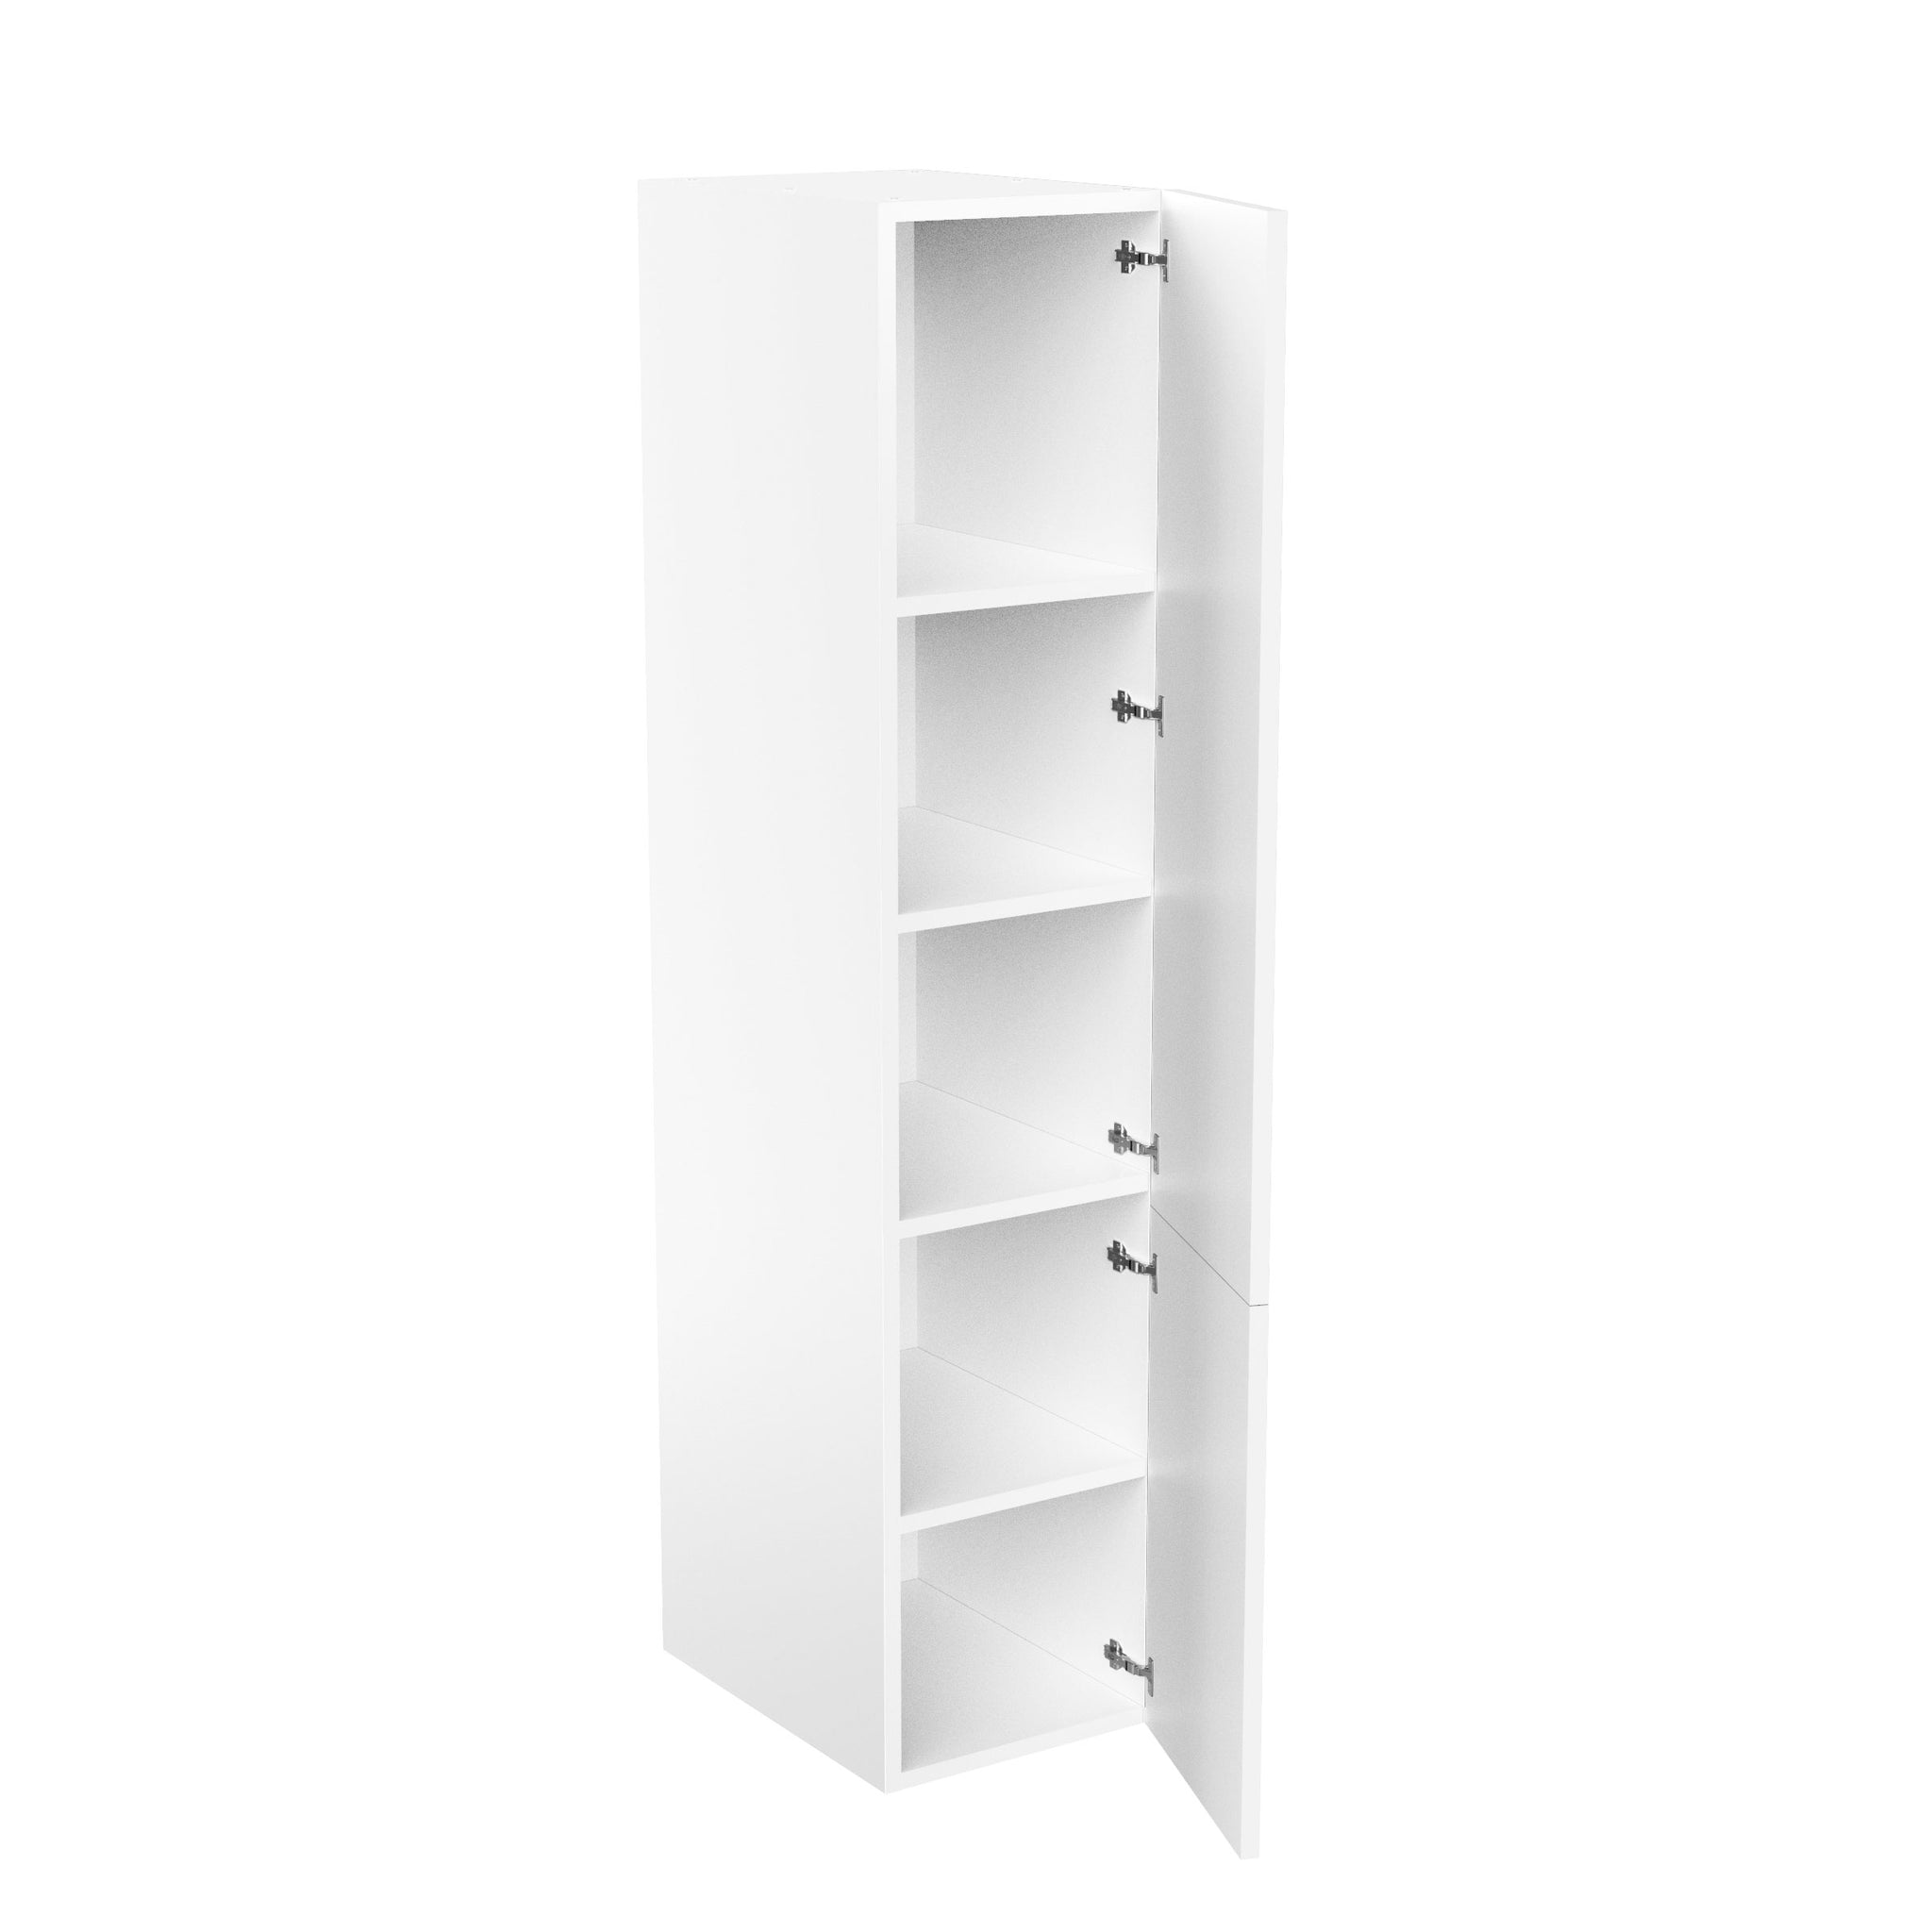 RTA - Glossy White - Single Door Tall Cabinets | 18"W x 84"H x 24"D